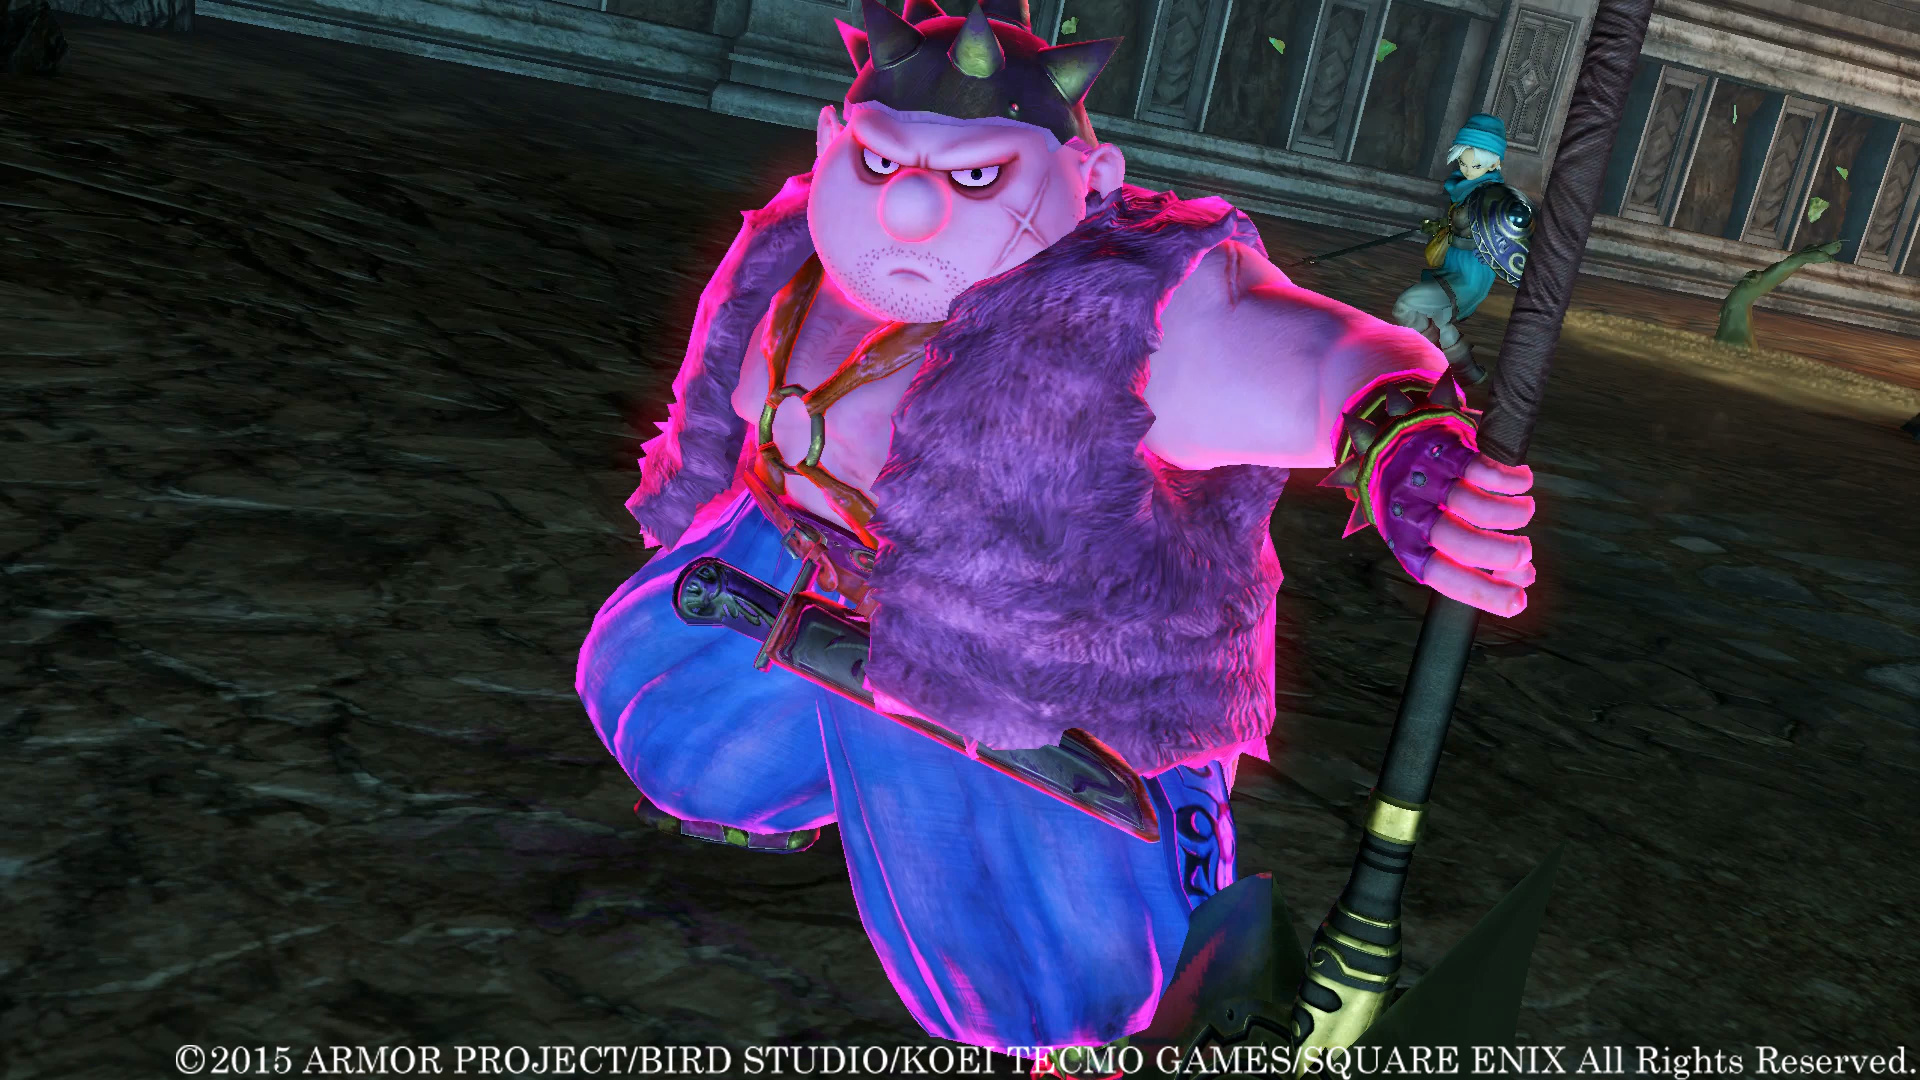 Dragon Quest Heroes: The World Tree's Woe and the Blight Below - Metacritic